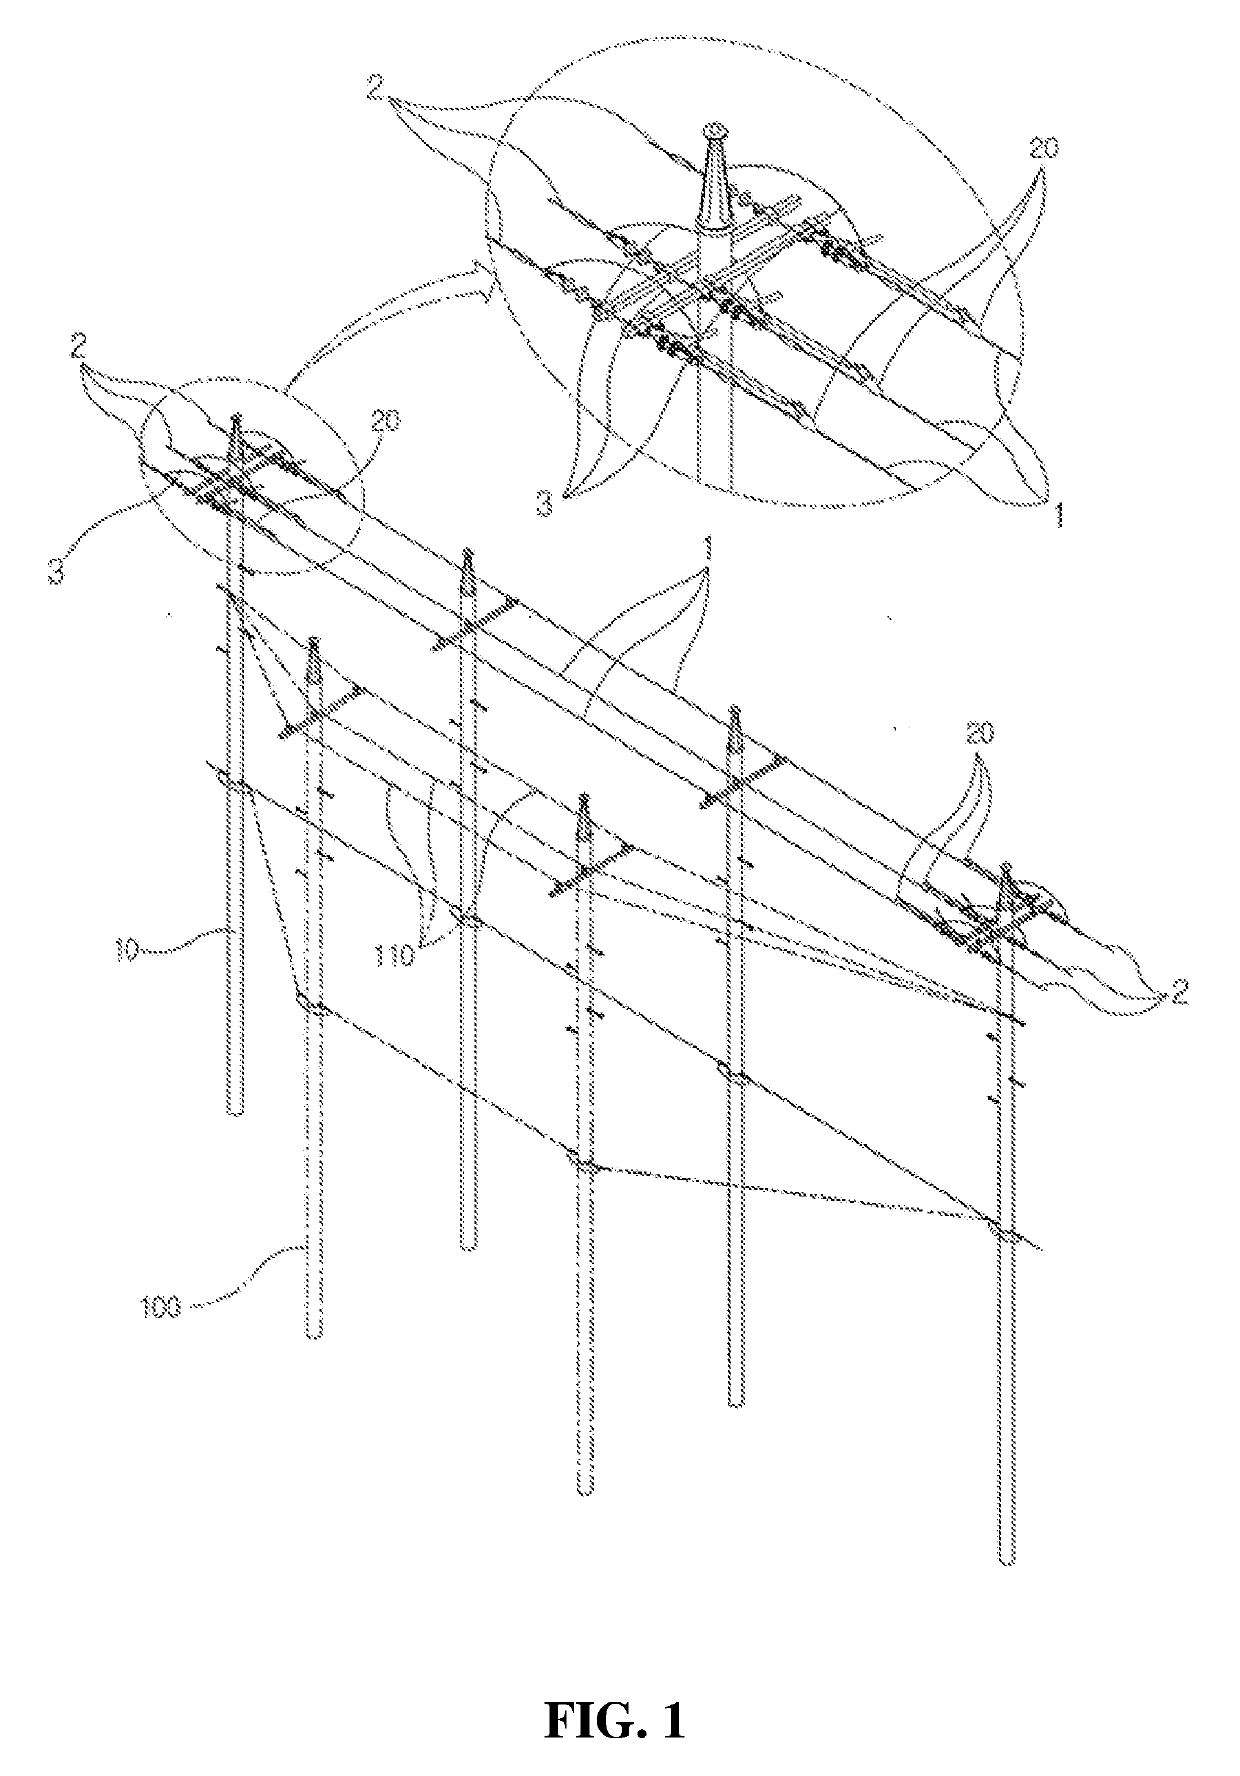 Method for performing uninterruptible power distribution work within section in de-energized line state by separating wires within pole-to-pole span by means of insulated live wire grip and bypass jumper cable